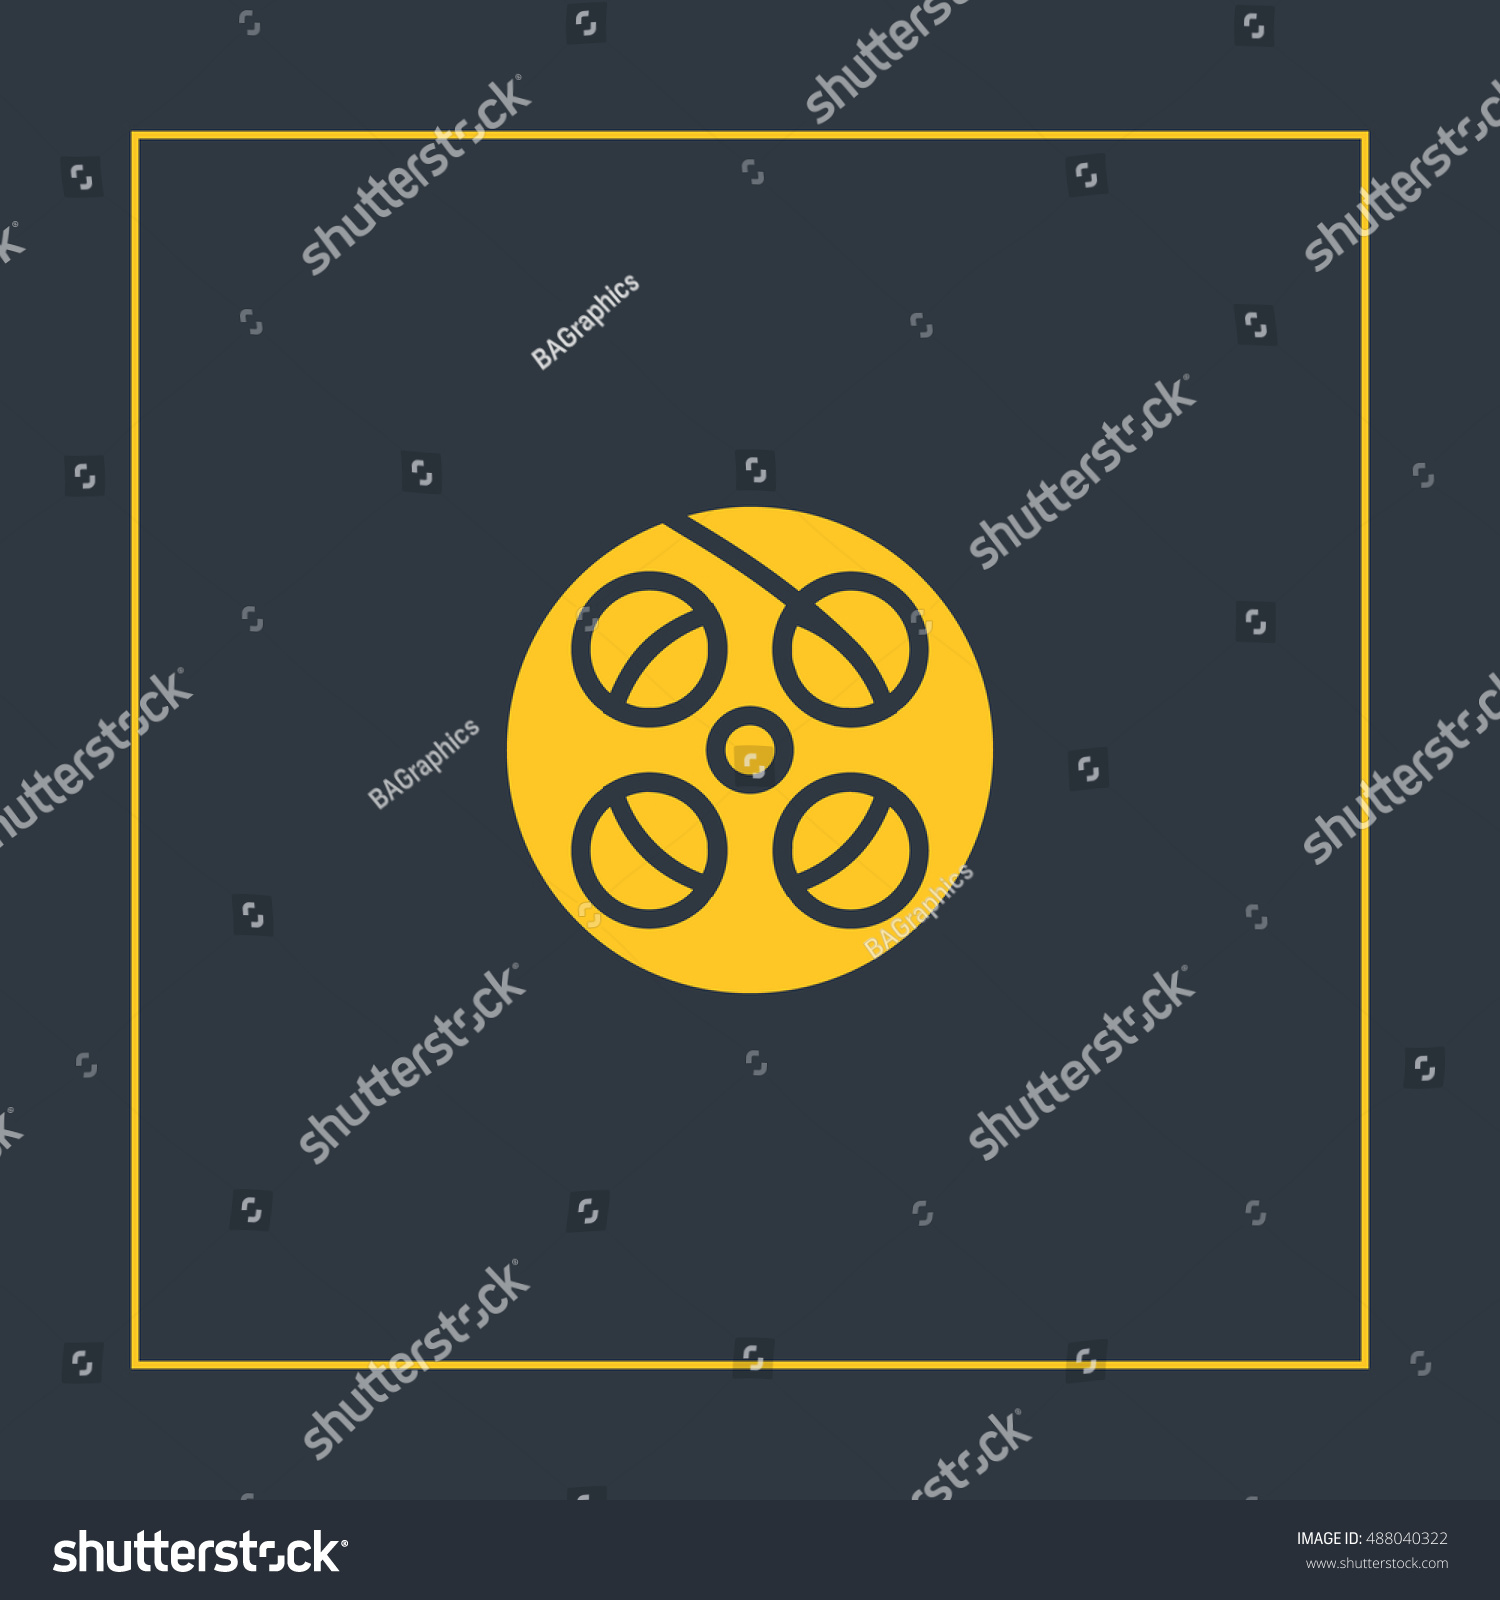 SVG of Film reel icon vector, clip art. Also useful as logo, web UI element, symbol, graphic image, silhouette and illustration. Compatible with ai, cdr, jpg, png, svg, pdf, ico and eps formats. svg